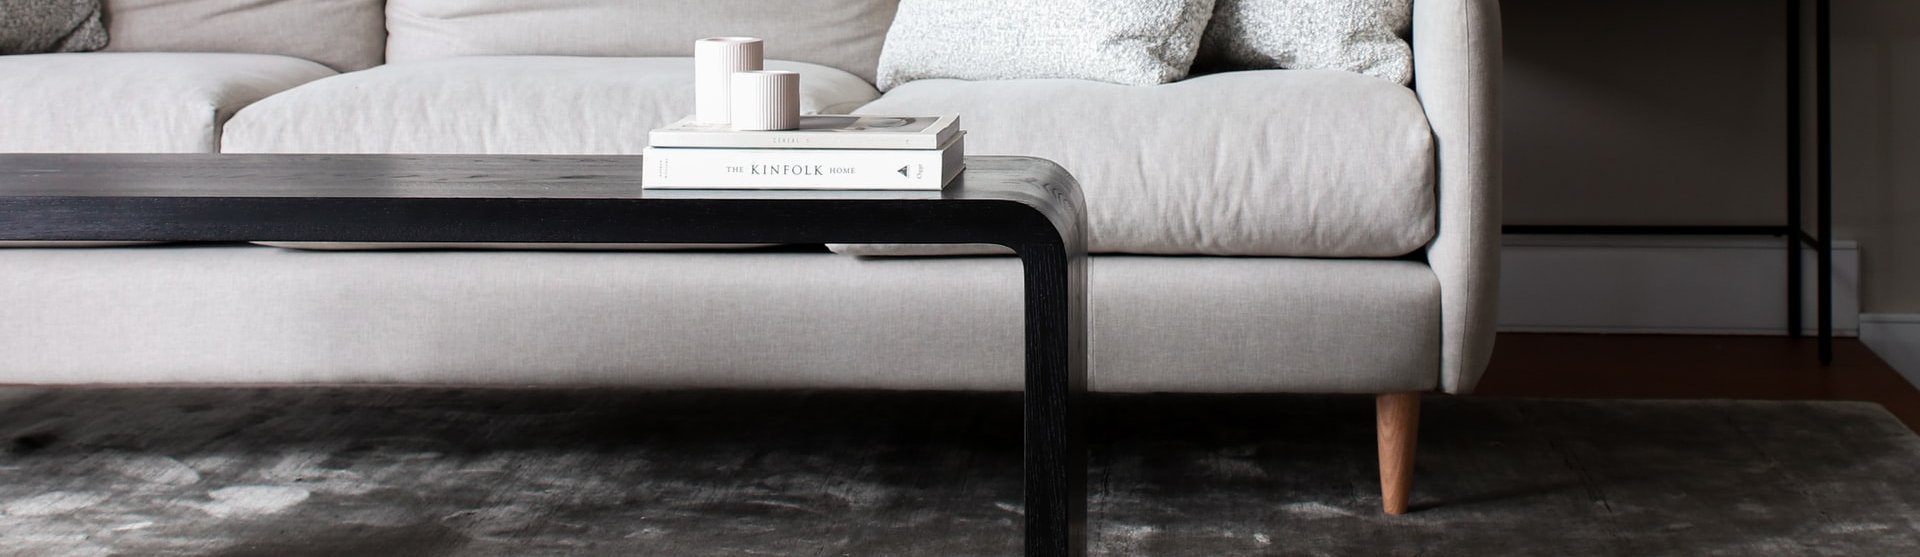 white couch and black coffee table on a brown hardwood floor from Lonsdale Flooring in Vancouver, BC